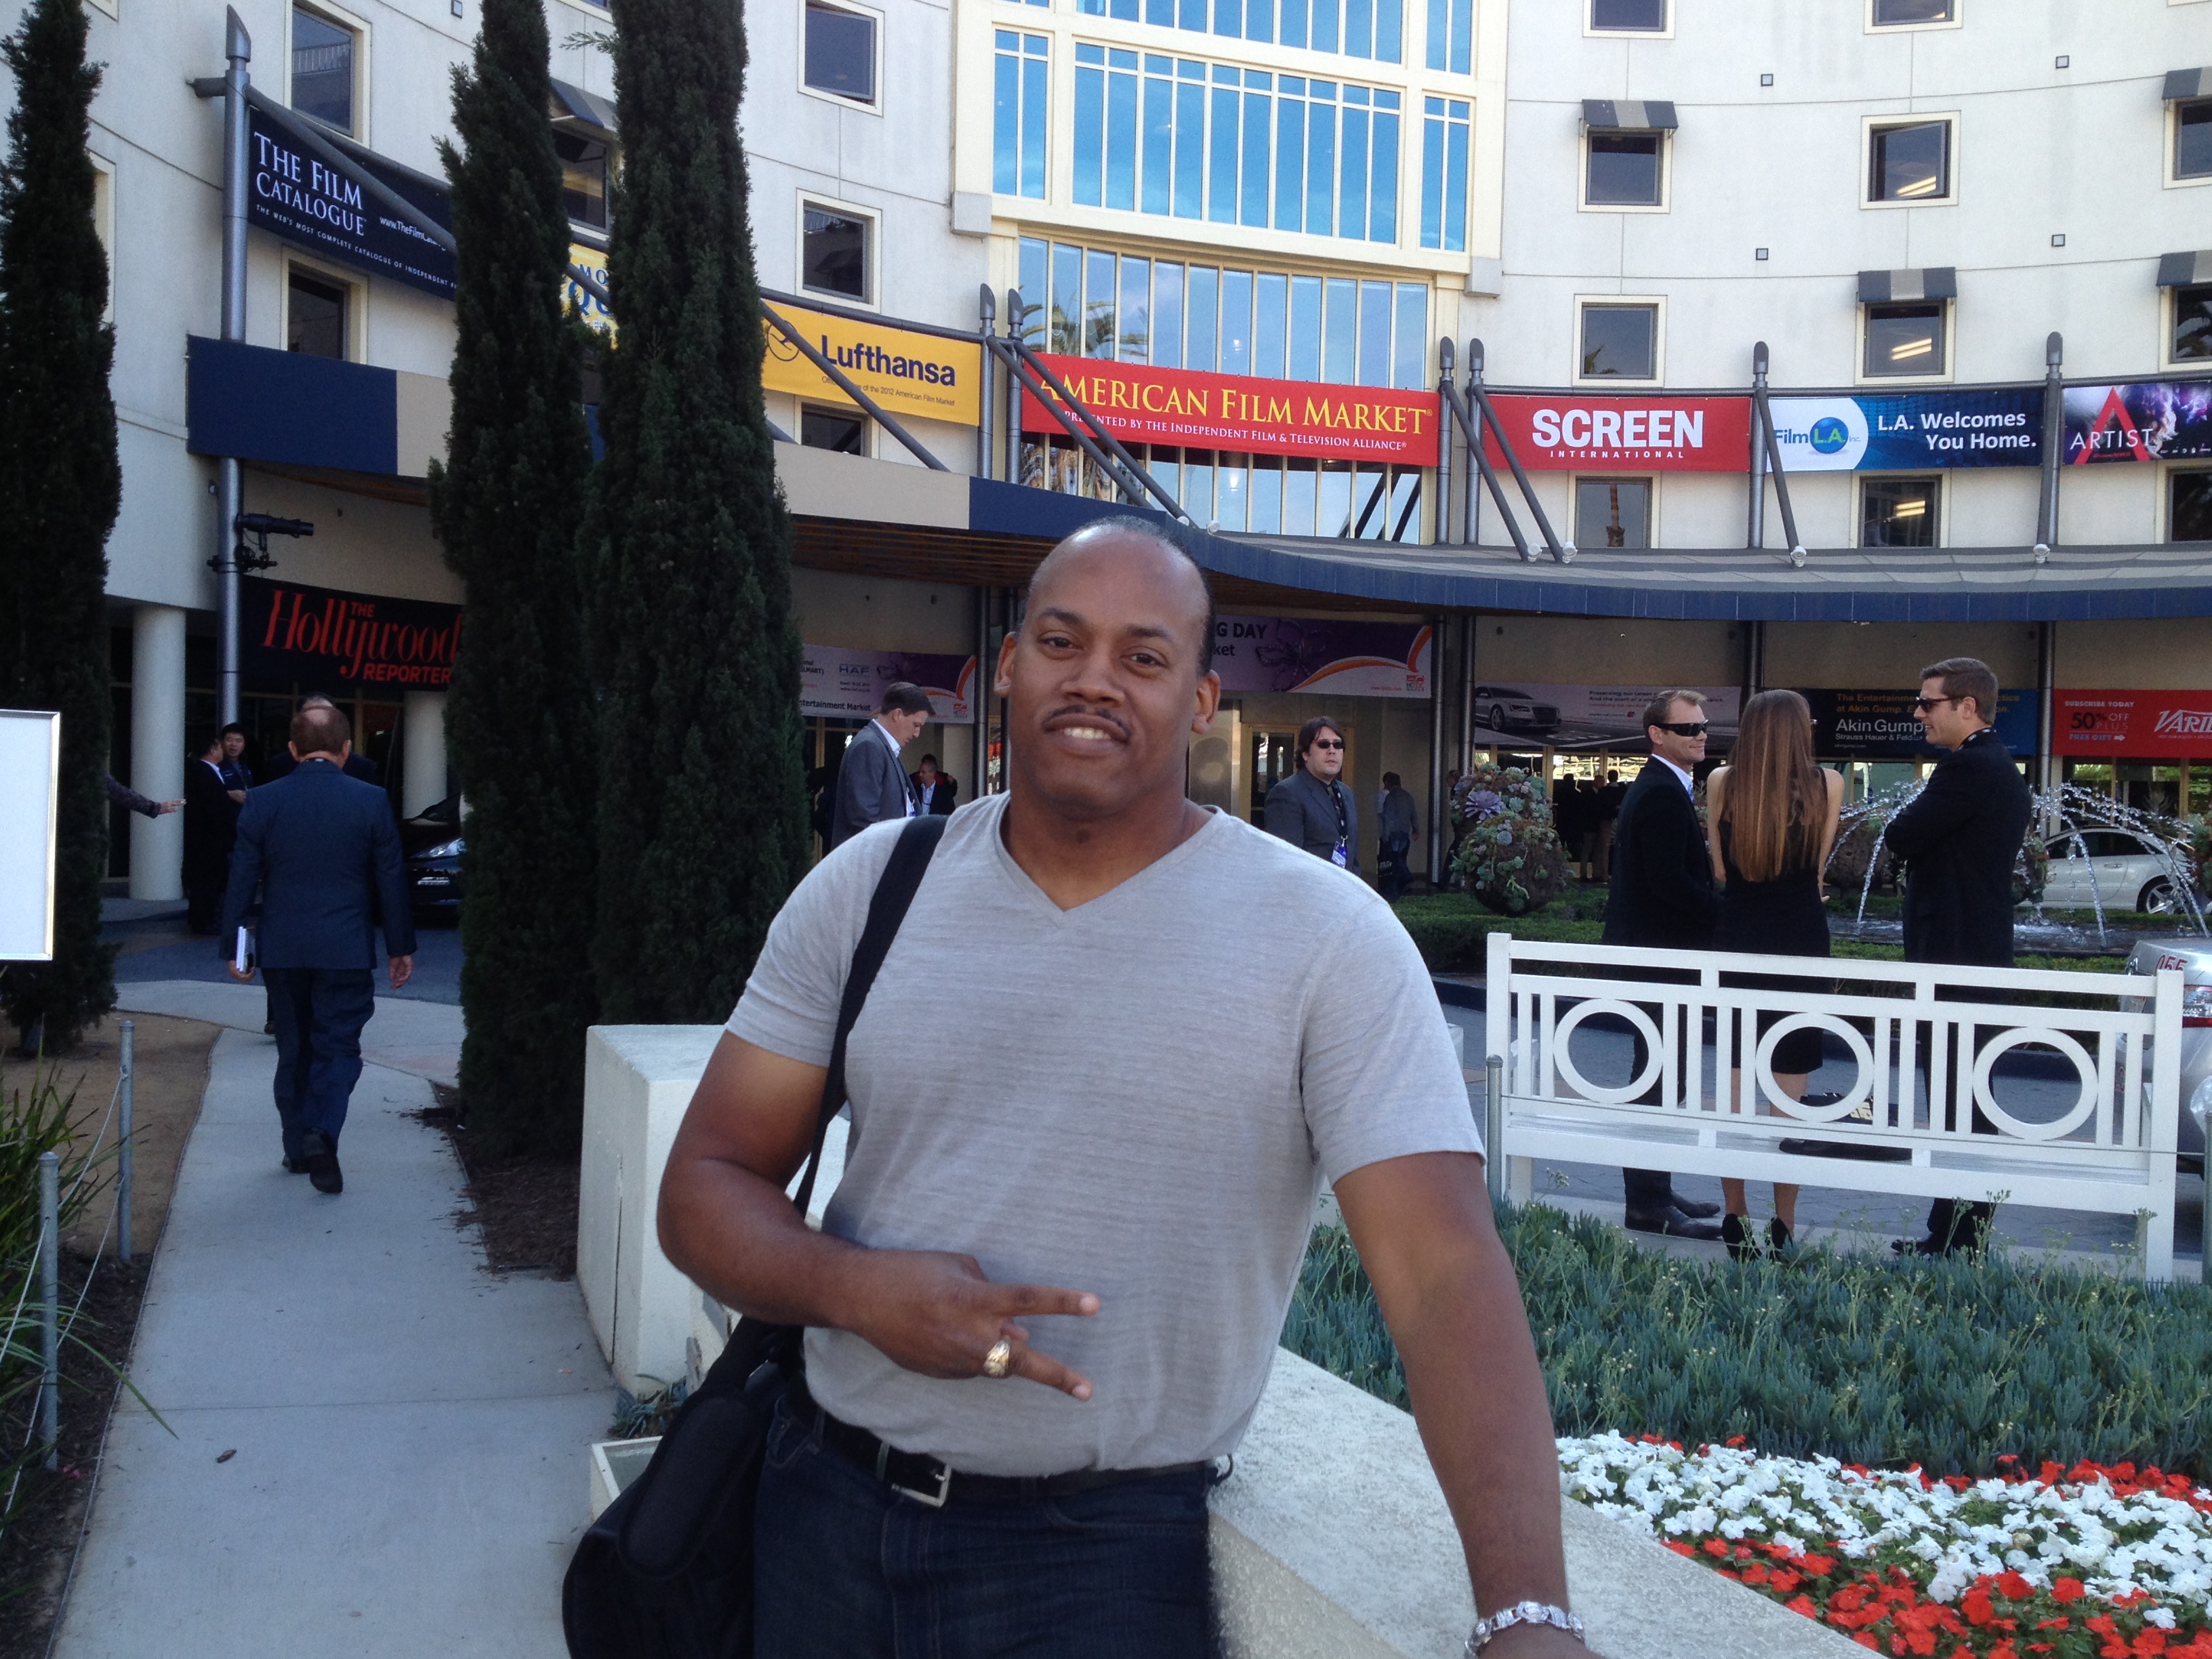 Producer Greg Carter putting in work at the 2012 American Film Market in Santa Monica.